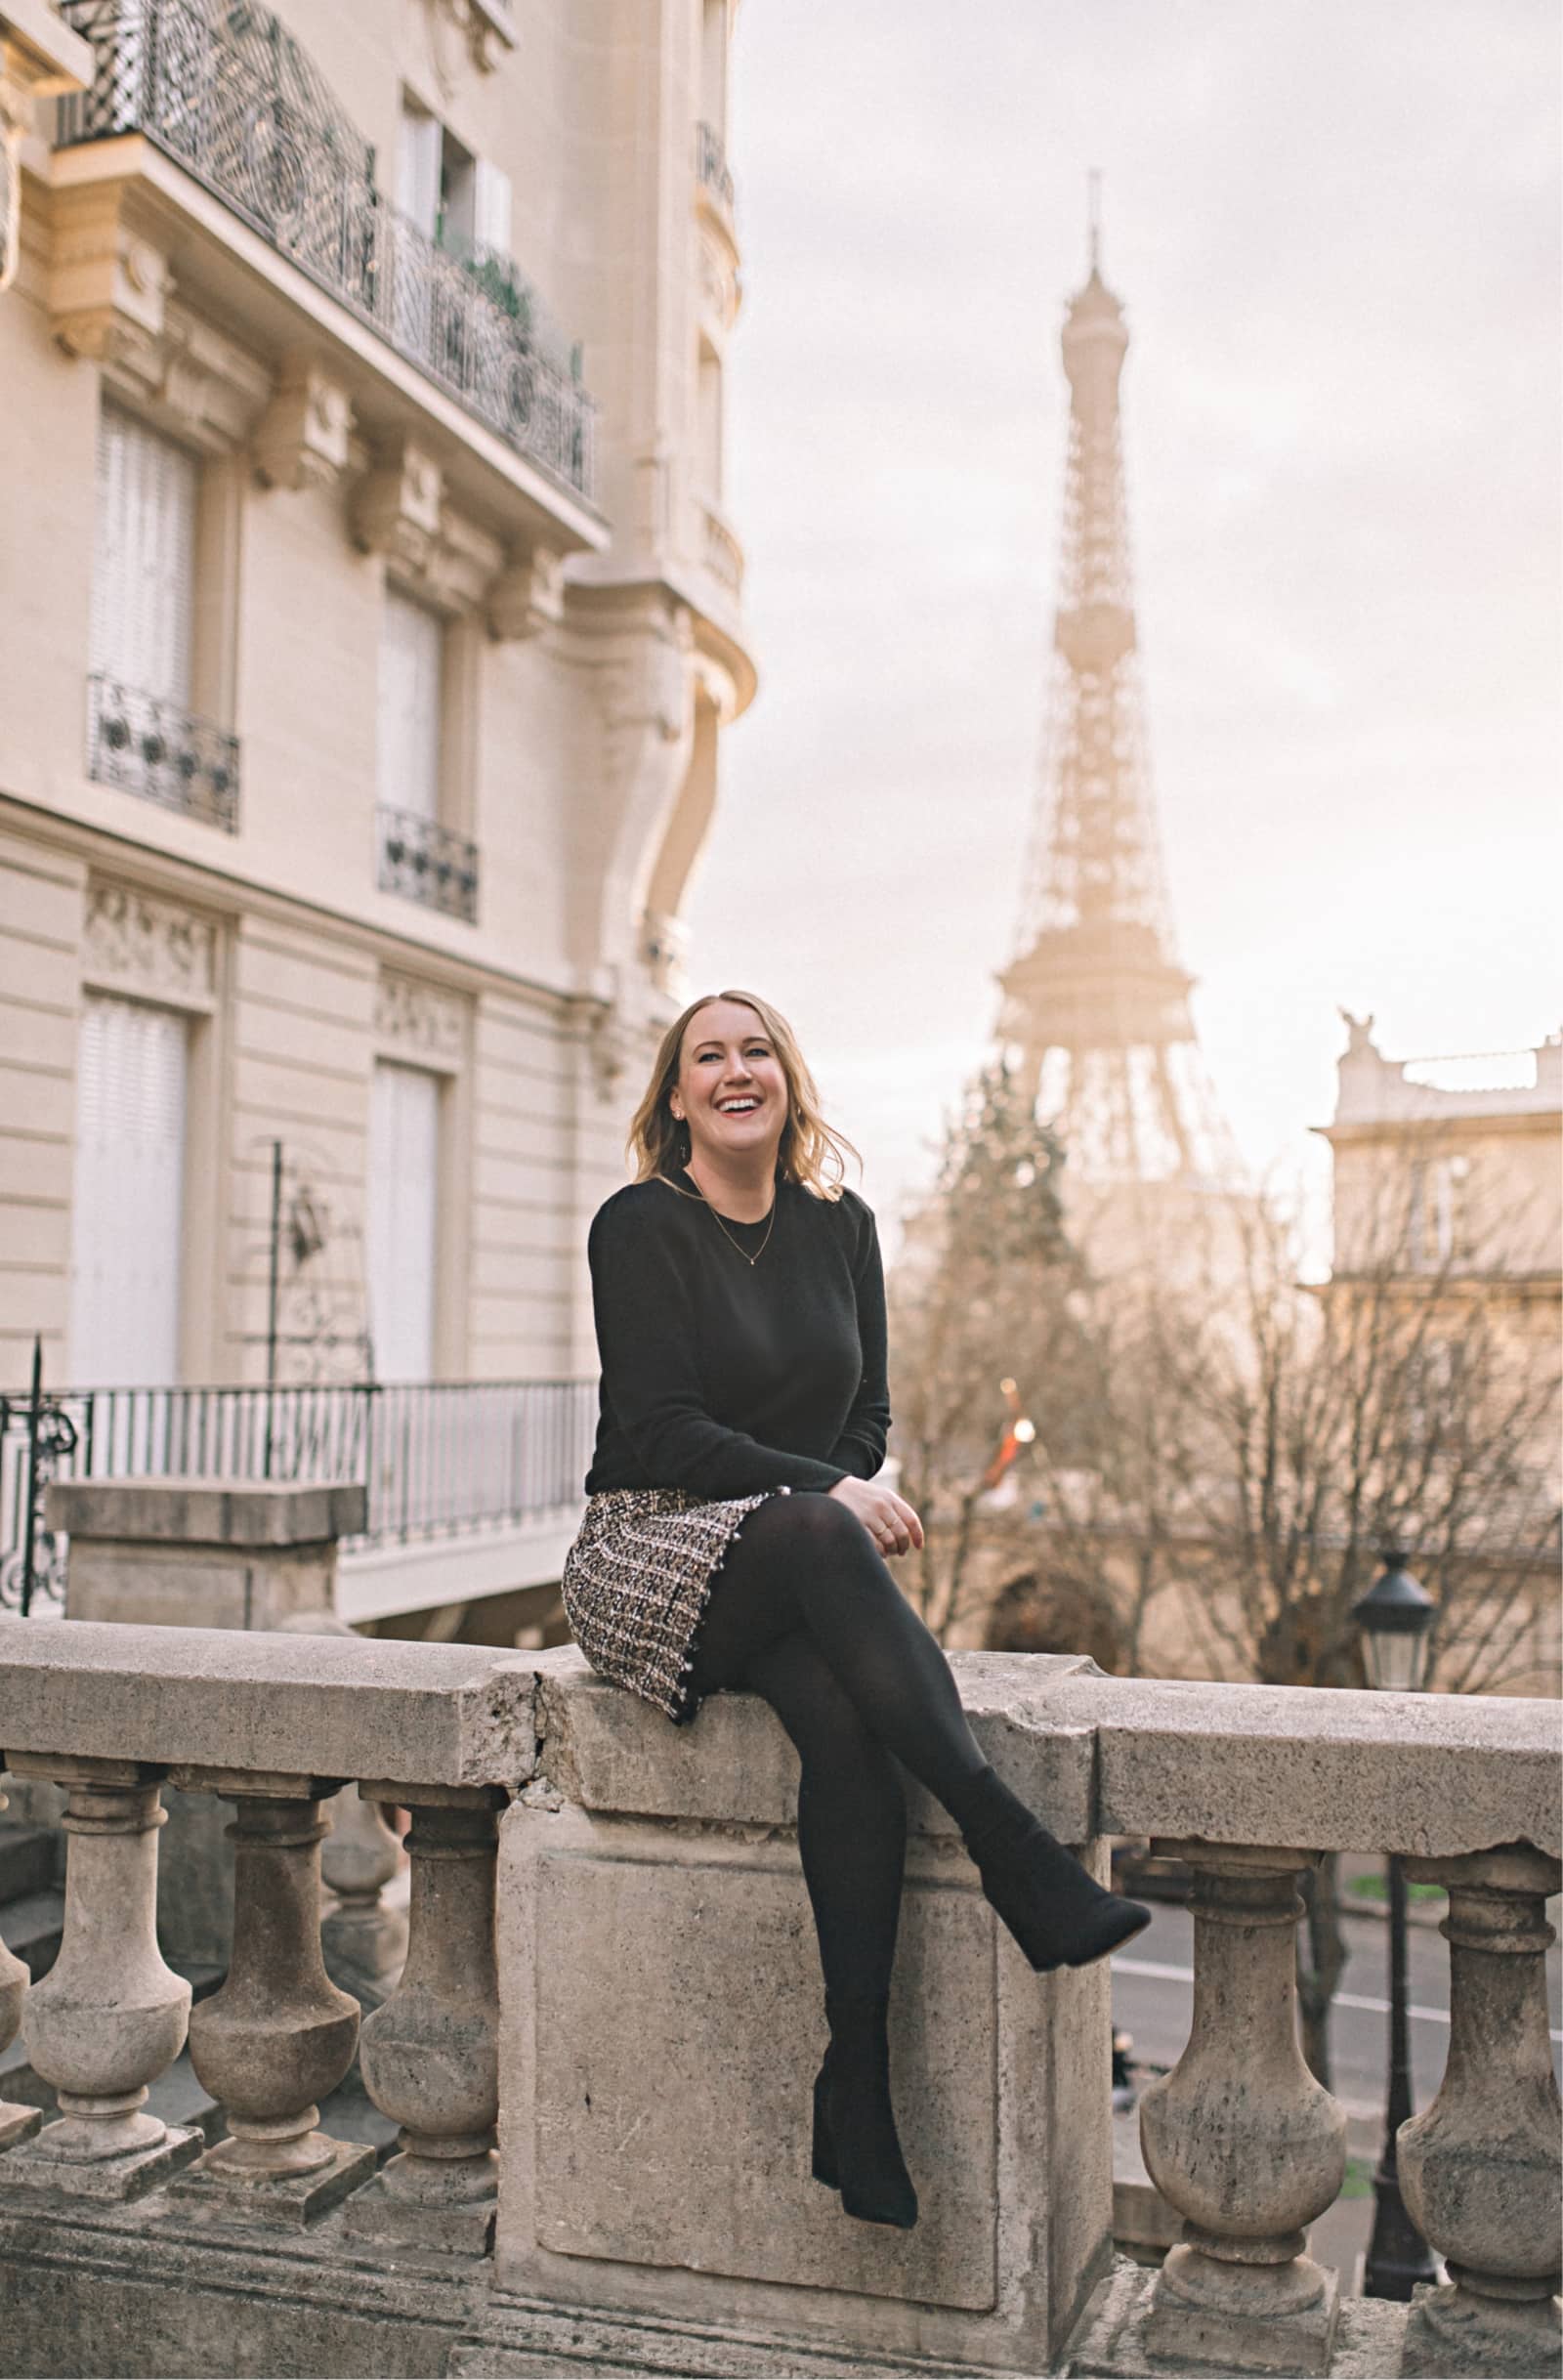 The Best Places to View the Eiffel Tower in Paris I wit & whimsy